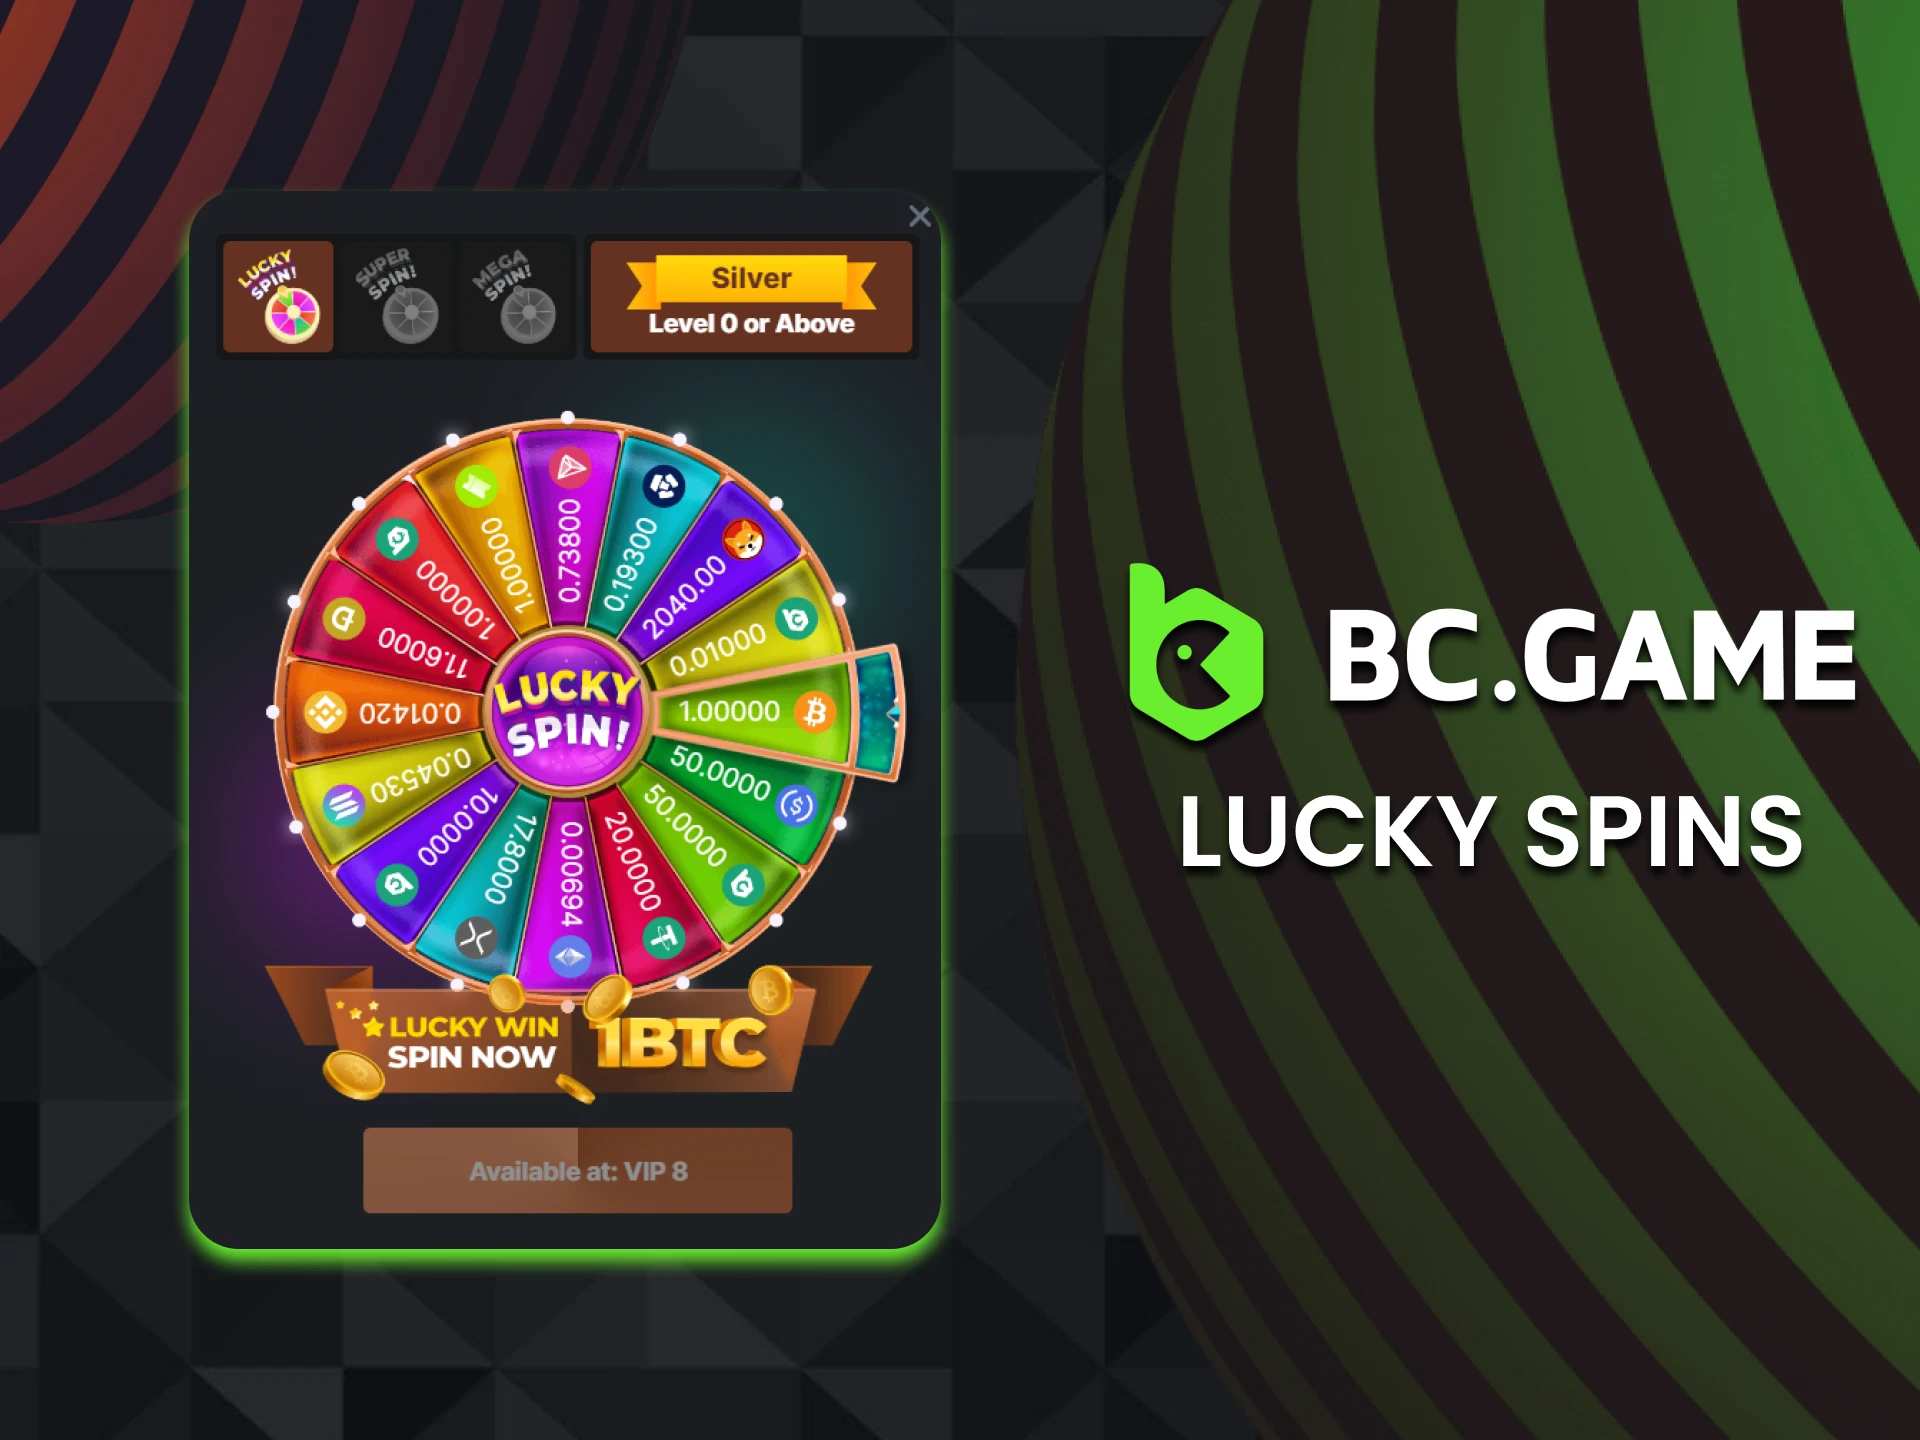 Spin the wheel and get BC Game Lucky Spin bonuses.